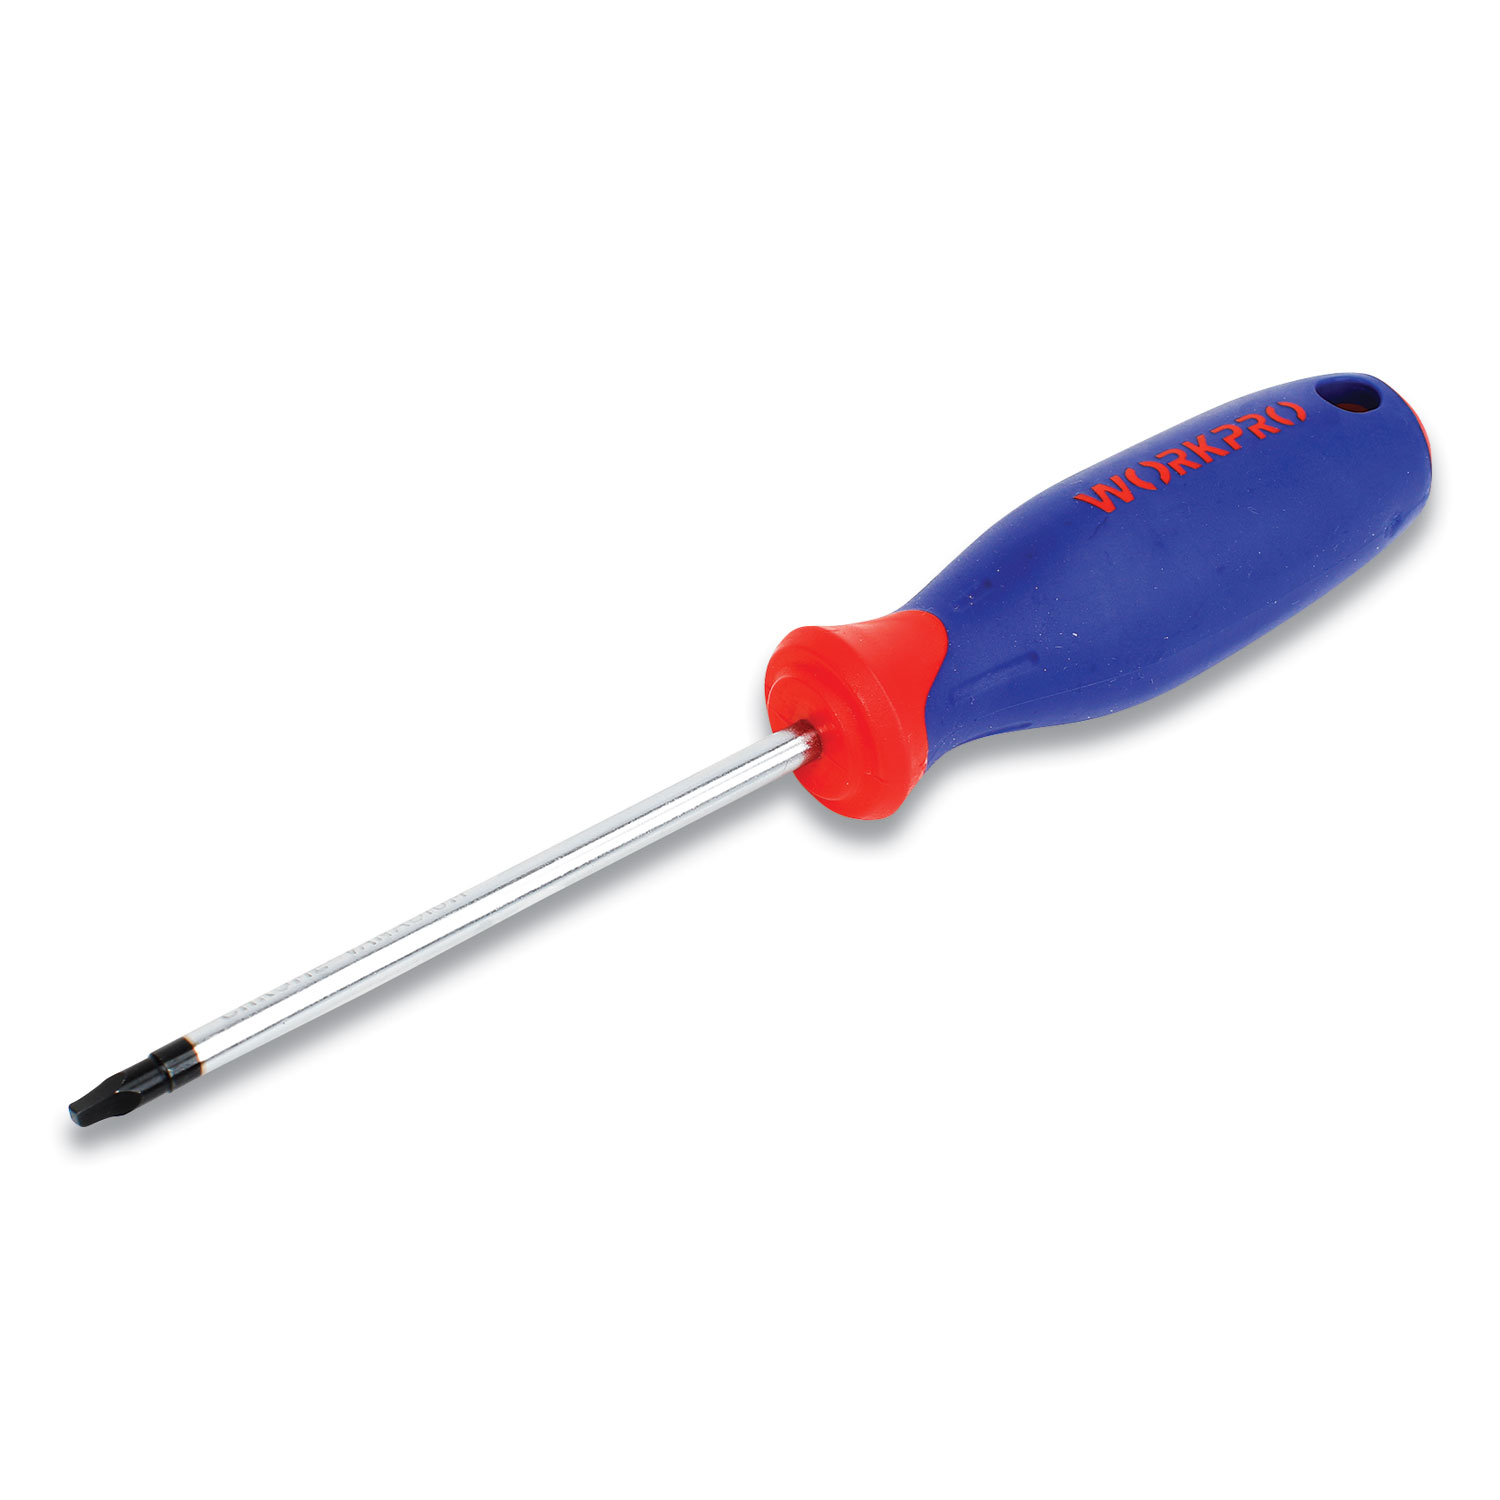 Workpro® Straight-Handle Cushion-Grip Screwdriver, S1 Square Tip, 4 Shaft